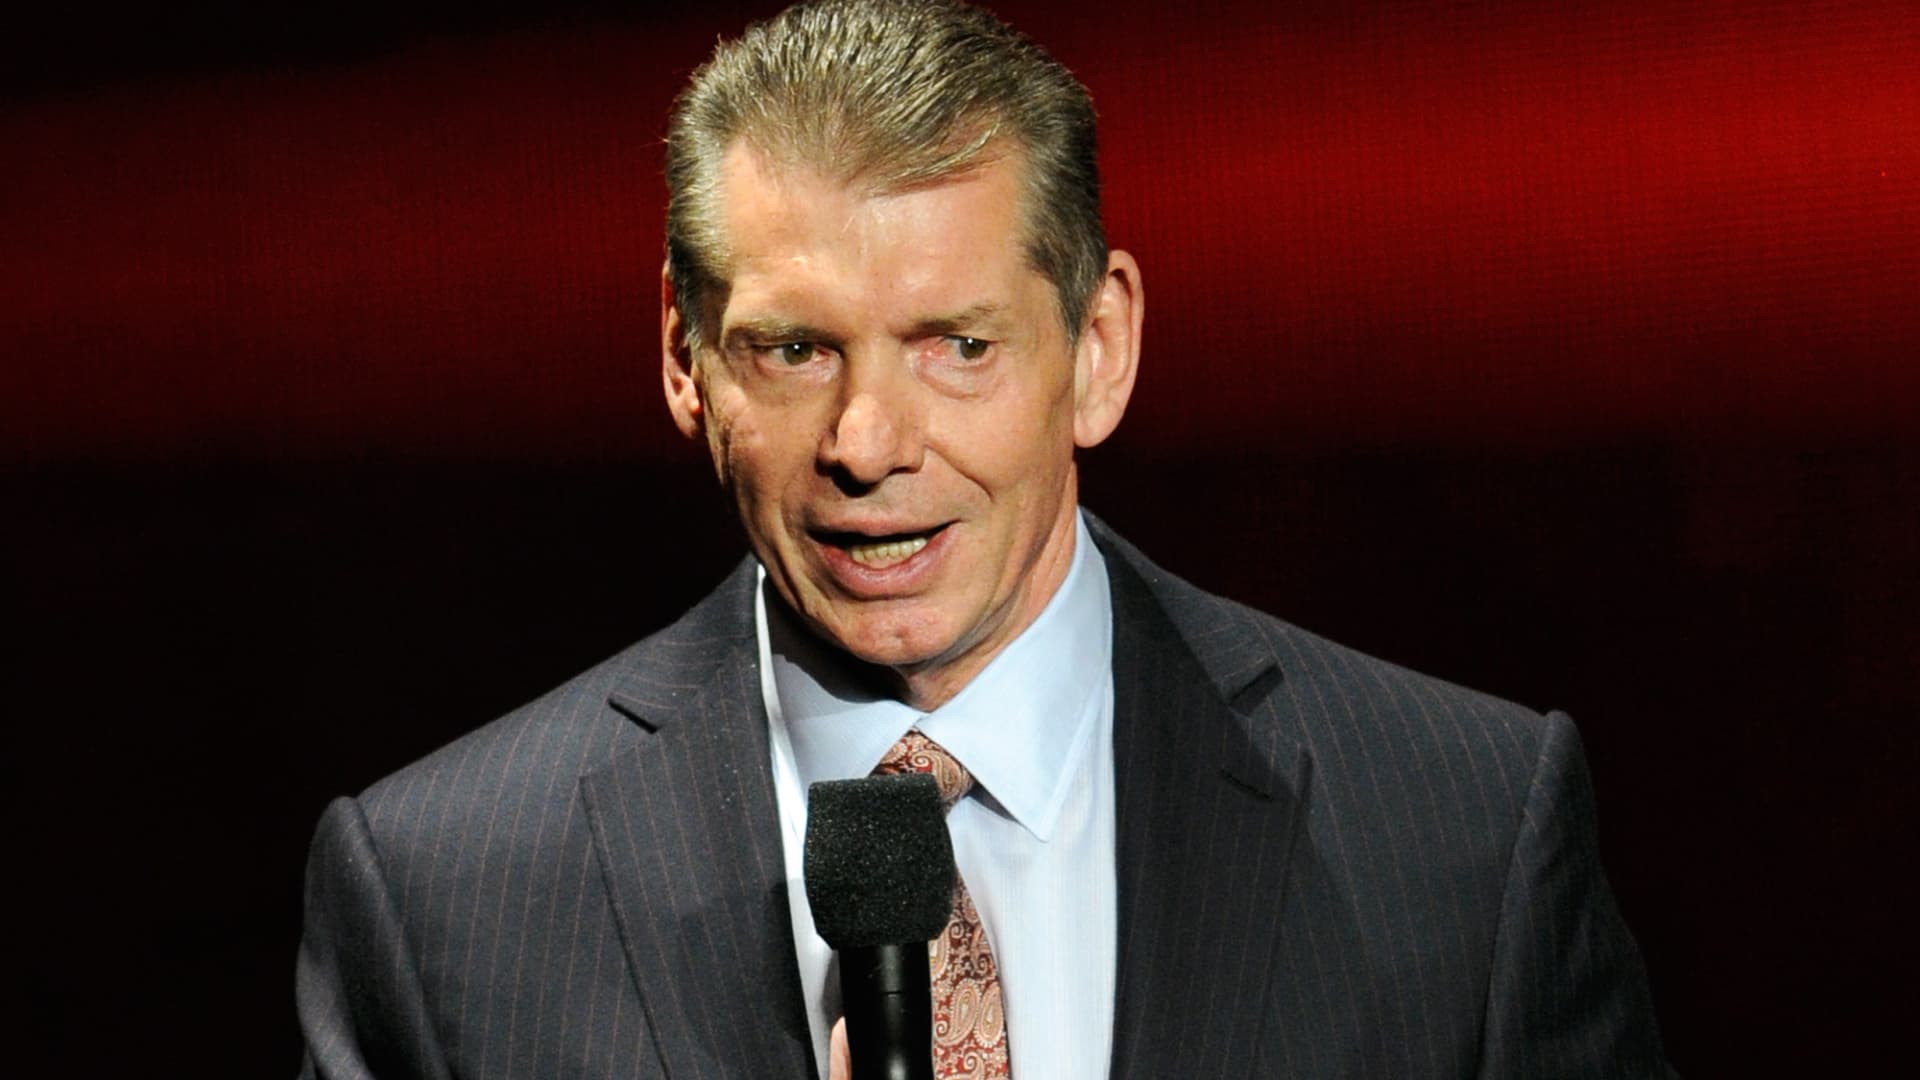 WWE boss Vince McMahon steps away from CEO role, will tackle misconduct probe on ‘Smackdown’